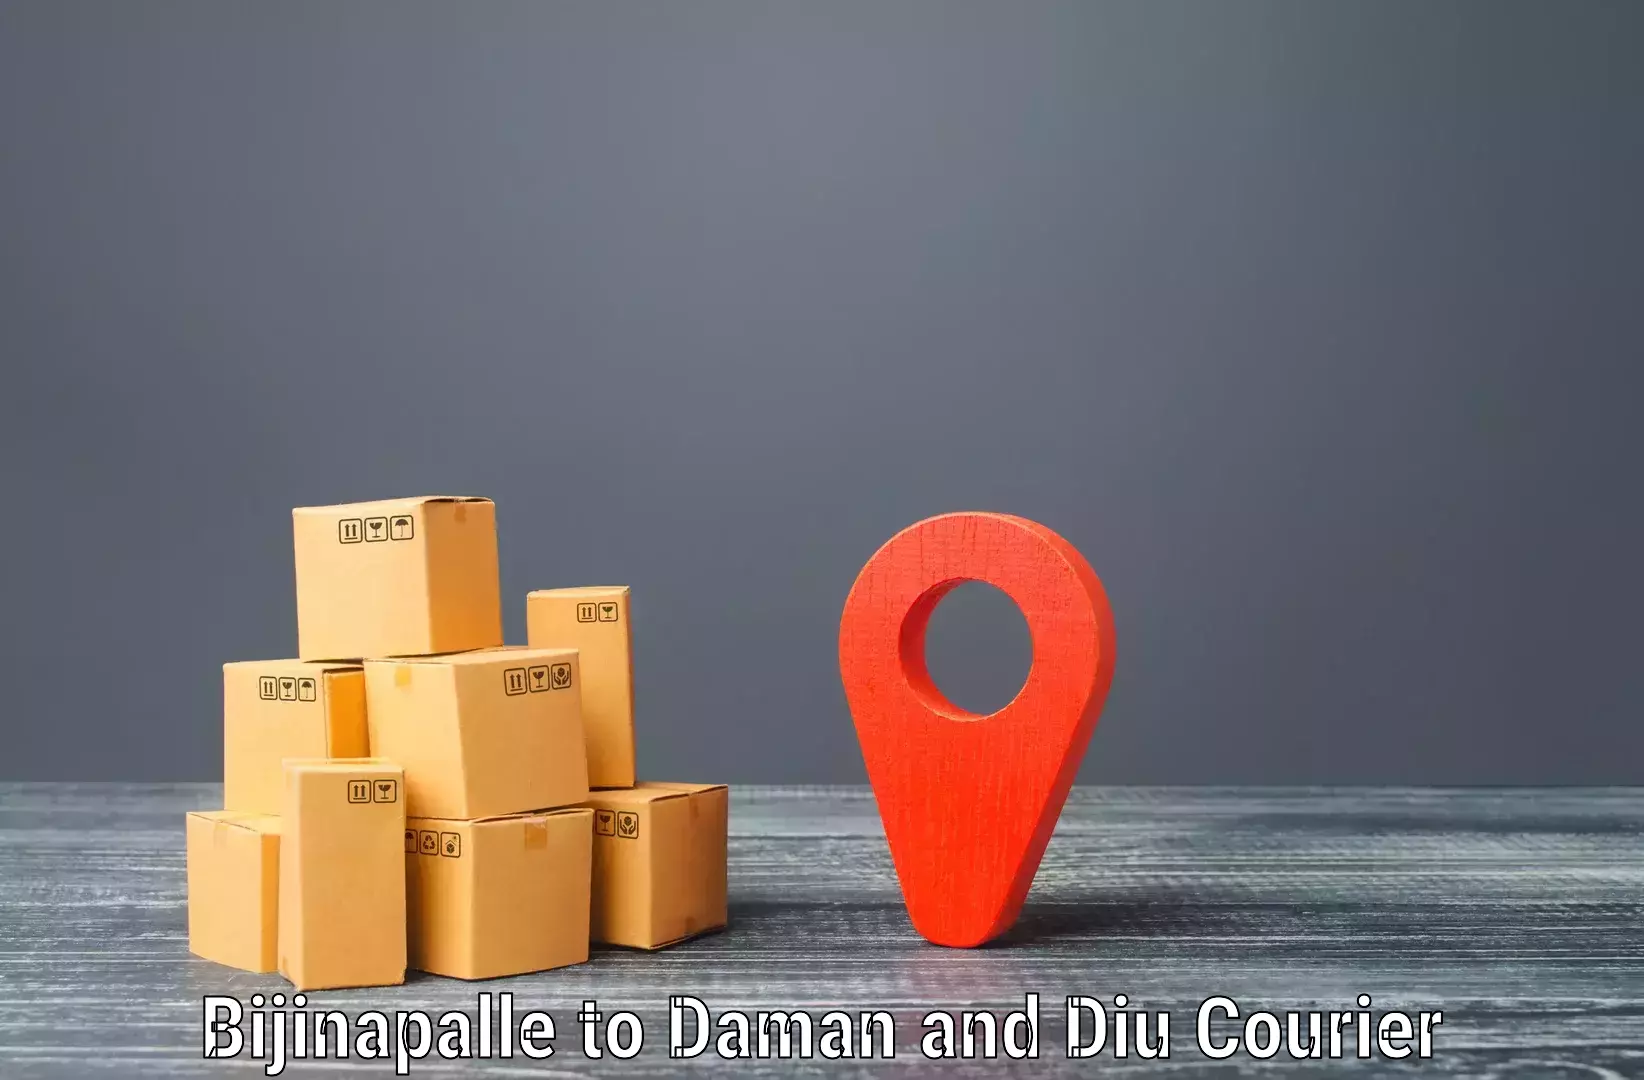 Tailored delivery services Bijinapalle to Daman and Diu